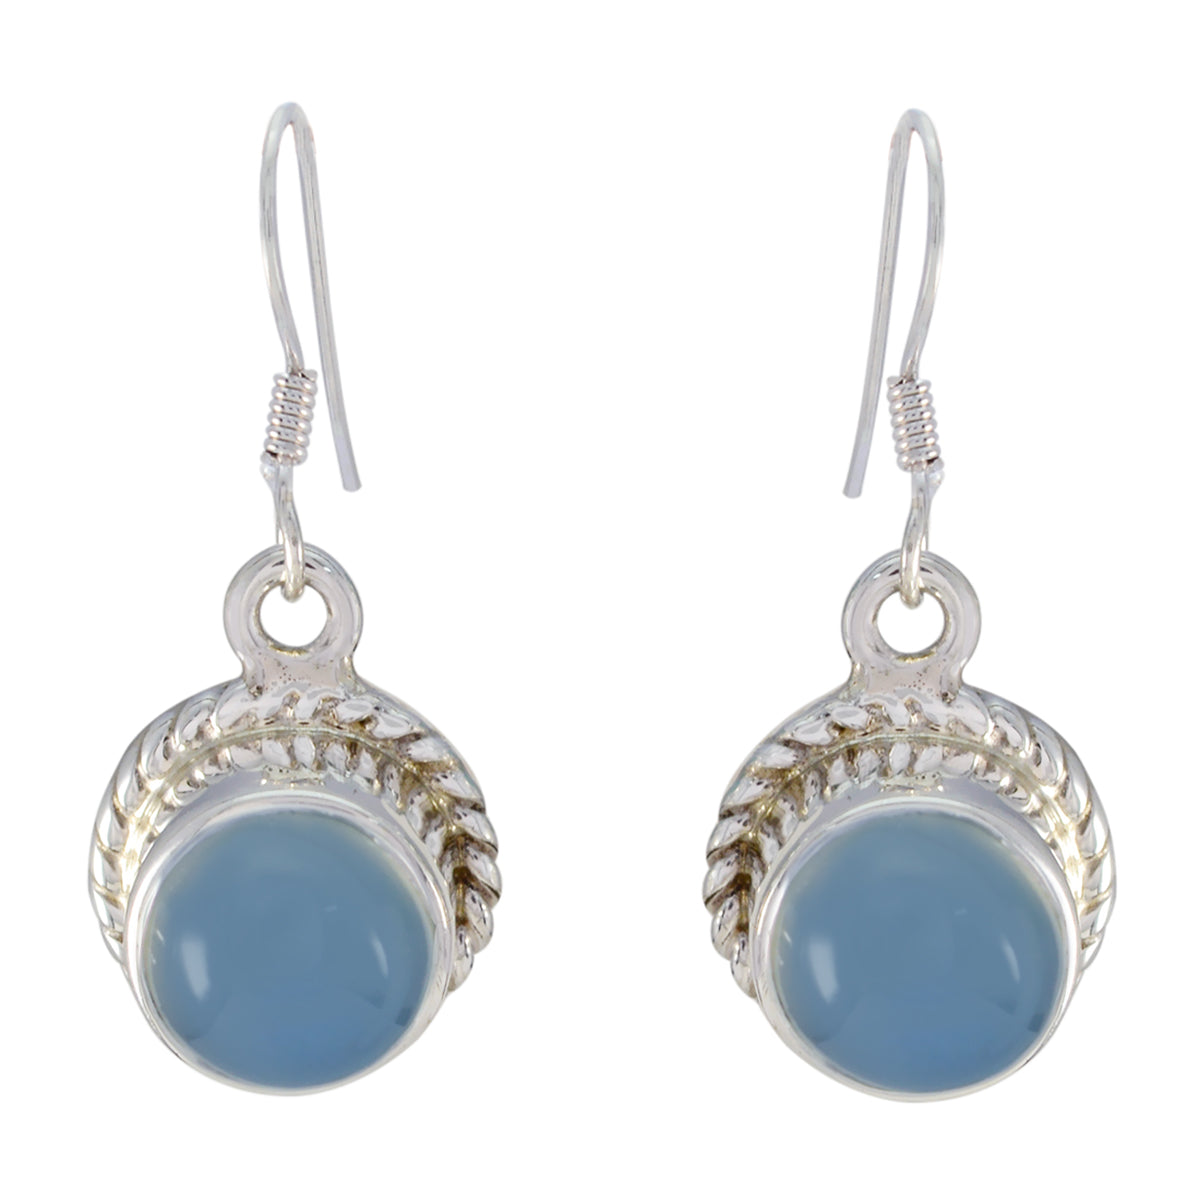 Riyo Real Gemstones round Cabochon Blue Chalcedony Silver Earring gift for christmas day